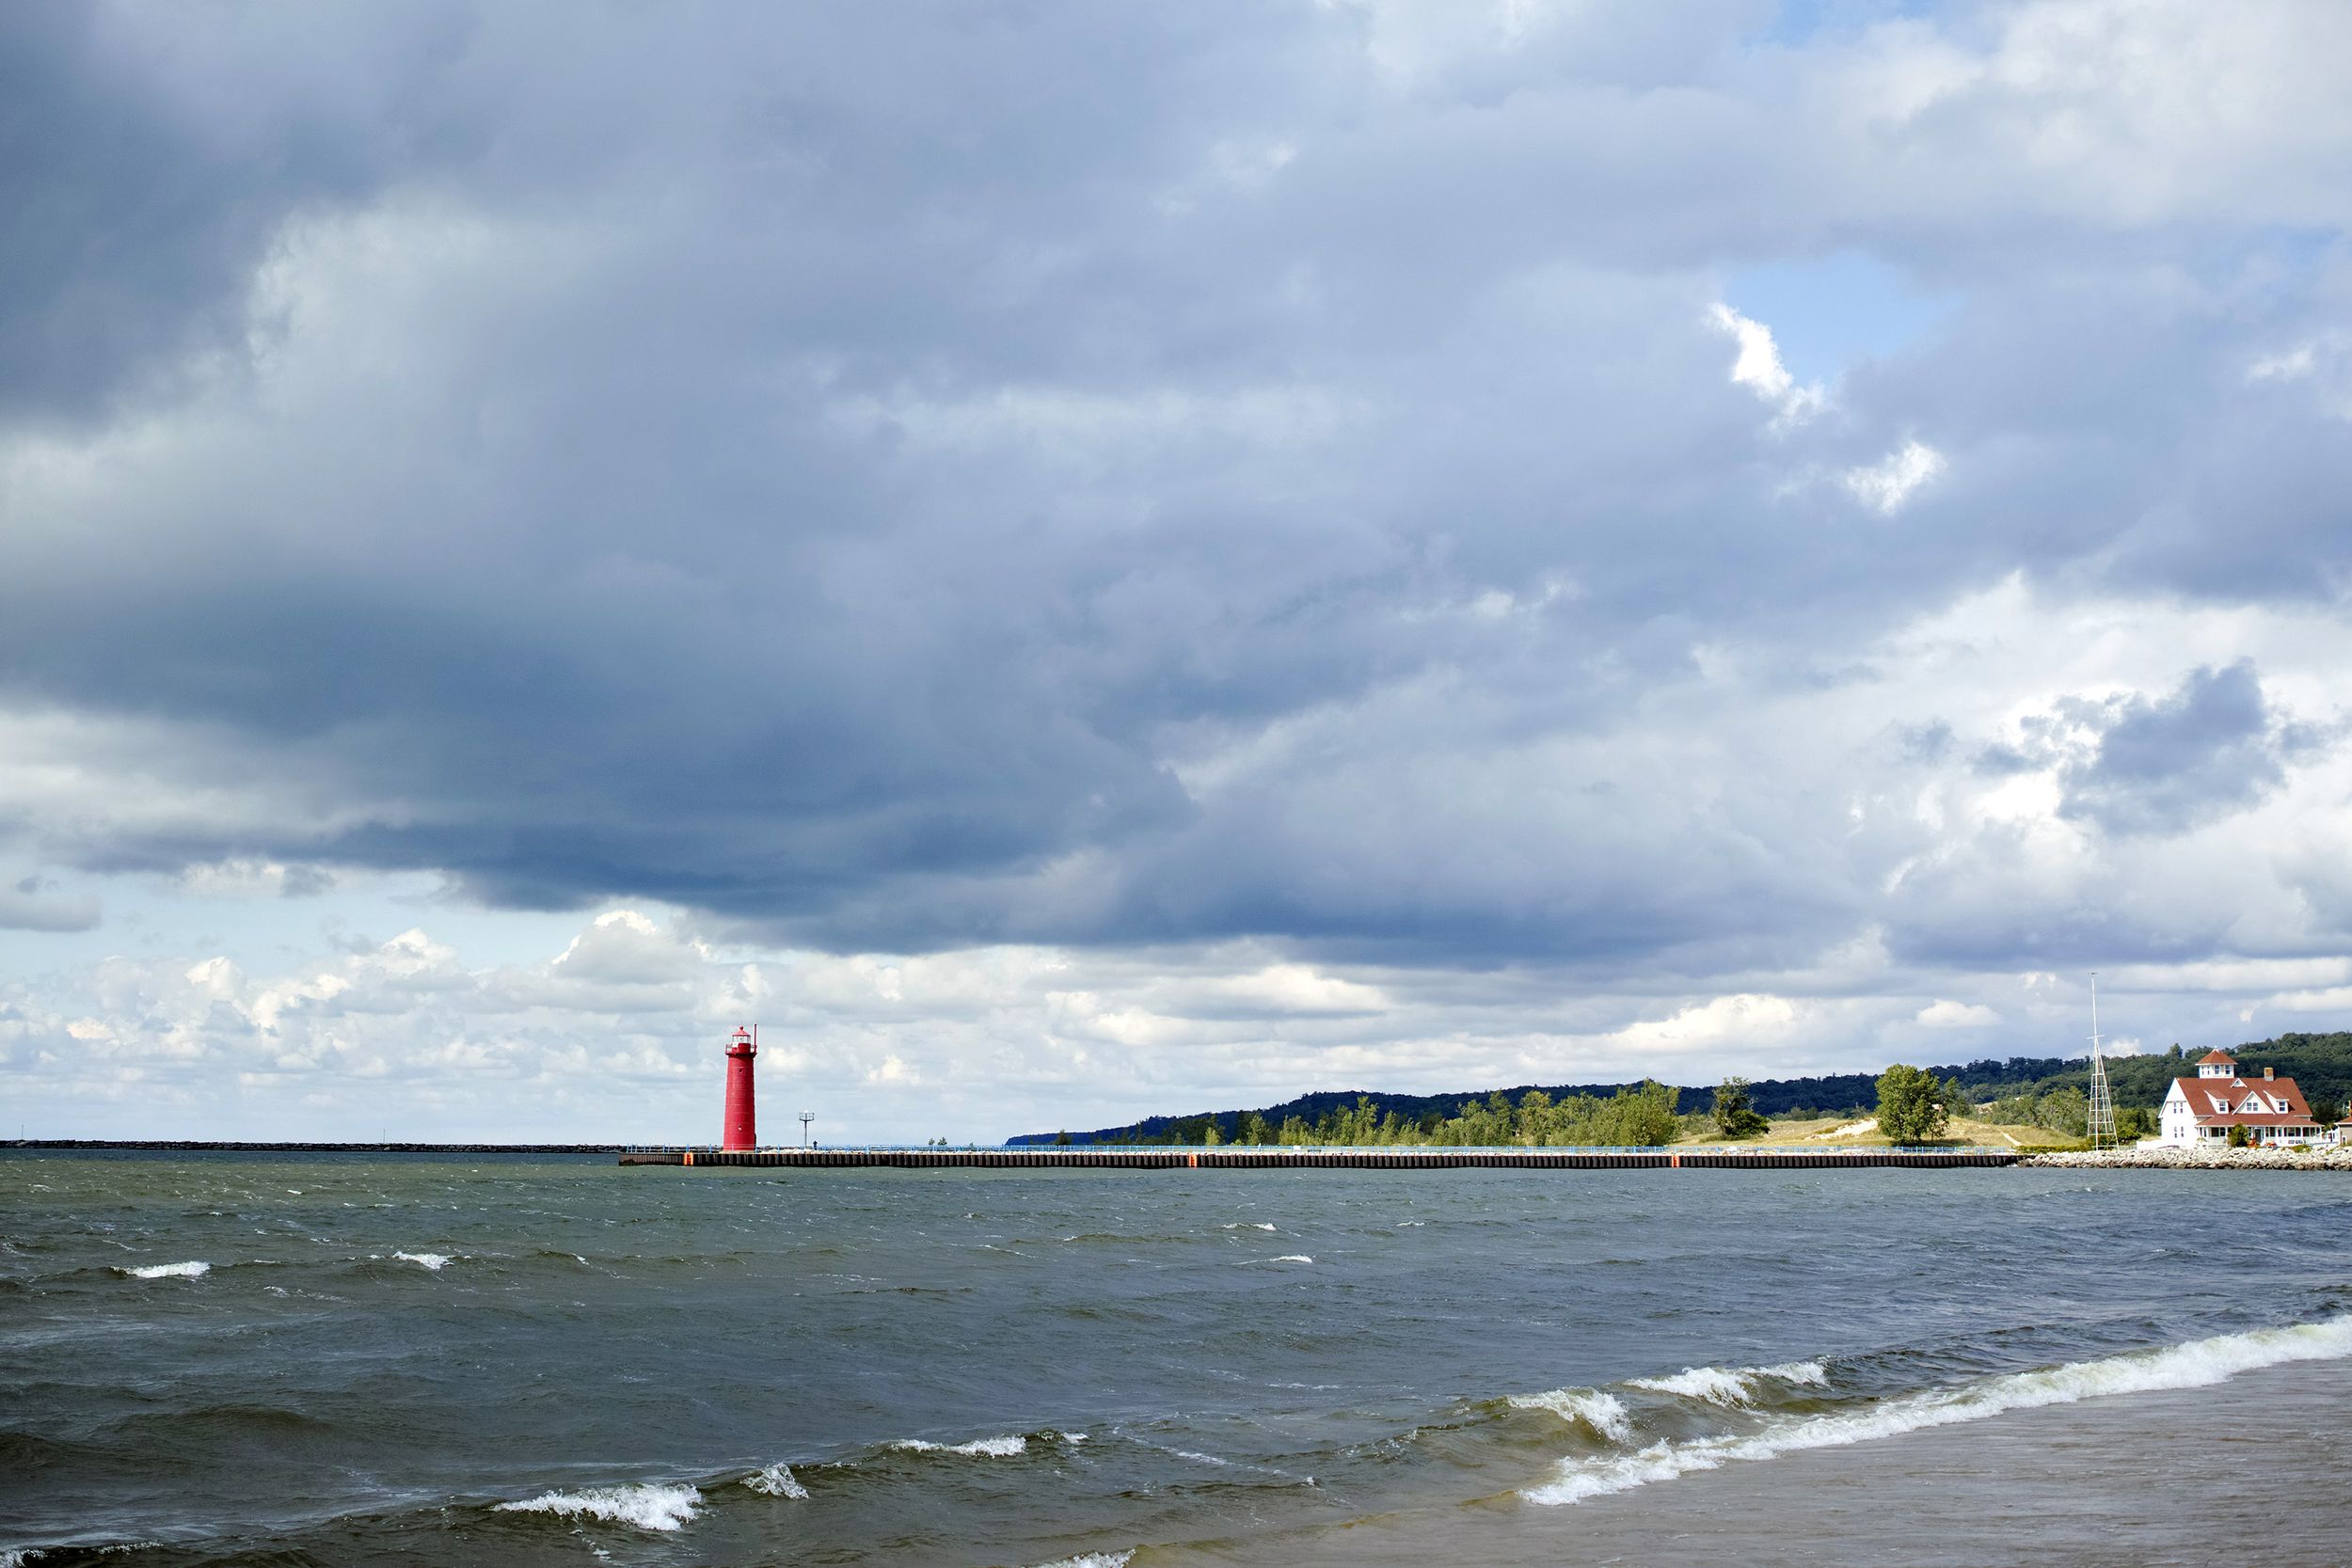 <p>Michigan may not be the first place that comes to mind when thinking "beach vacation," but Muskegon's <a href="https://www.michigan.org/property/pere-marquette-park/">Pere Marquette Beach</a> on Lake Michigan is free — and the largest in western Michigan. It includes a playground, volleyball courts, a restaurant and access to lighthouses and the Muskegon Channel. It's also home to the <a href="https://silversidesmuseum.org">USS Silversides</a>, a World War II submarine and museum ($17.55 for adults, $13 for kids 5 to 17). Downtown Muskegon offers a variety of affordable restaurants, three <a href="https://www.cheapism.com/blog/10-brewery-tours-feature-free-craft-beer-4186/">breweries</a>, and a regular farmers market. Hotel prices? For this beach trip, you can <a href="https://www.dpbolvw.net/click-3559491-12848577?sid=msnshop15286-vr&url=https%3A%2F%2Fwww.orbitz.com%2FPere-Marquette-Park-Beach-Hotels.0-l6170098-0.Travel-Guide-Filter-Hotels">book hotel rooms</a> for less than $70 a night.</p>